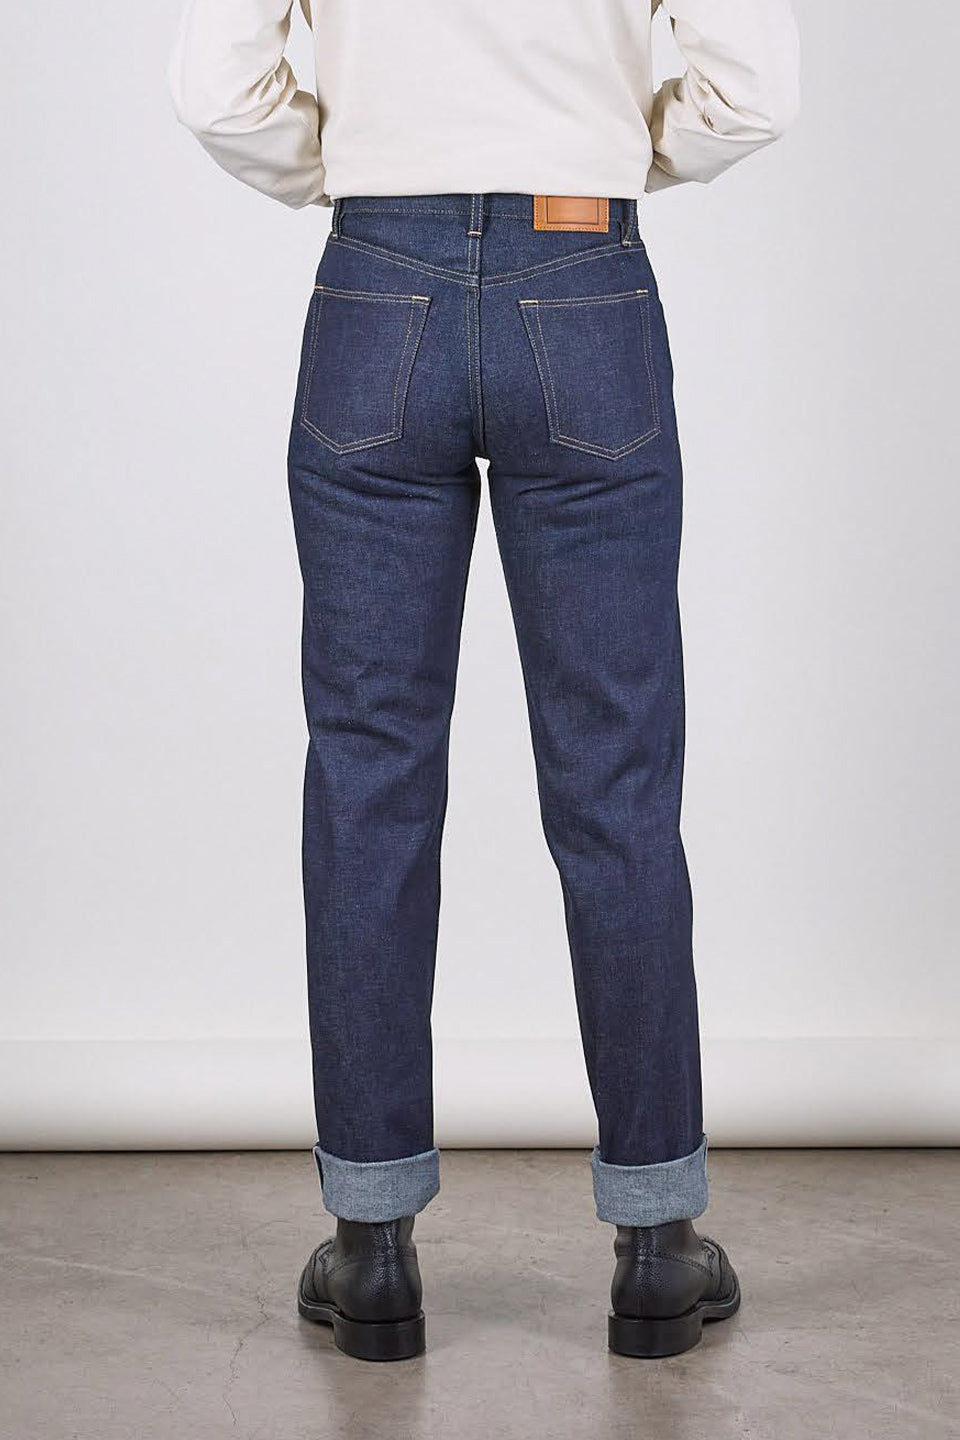 WC2 Relaxed Indigo 14oz Raw Selvedge Womens Jeans Blackhorse Lane Ateliers – Blackhorse Lane Ateliers